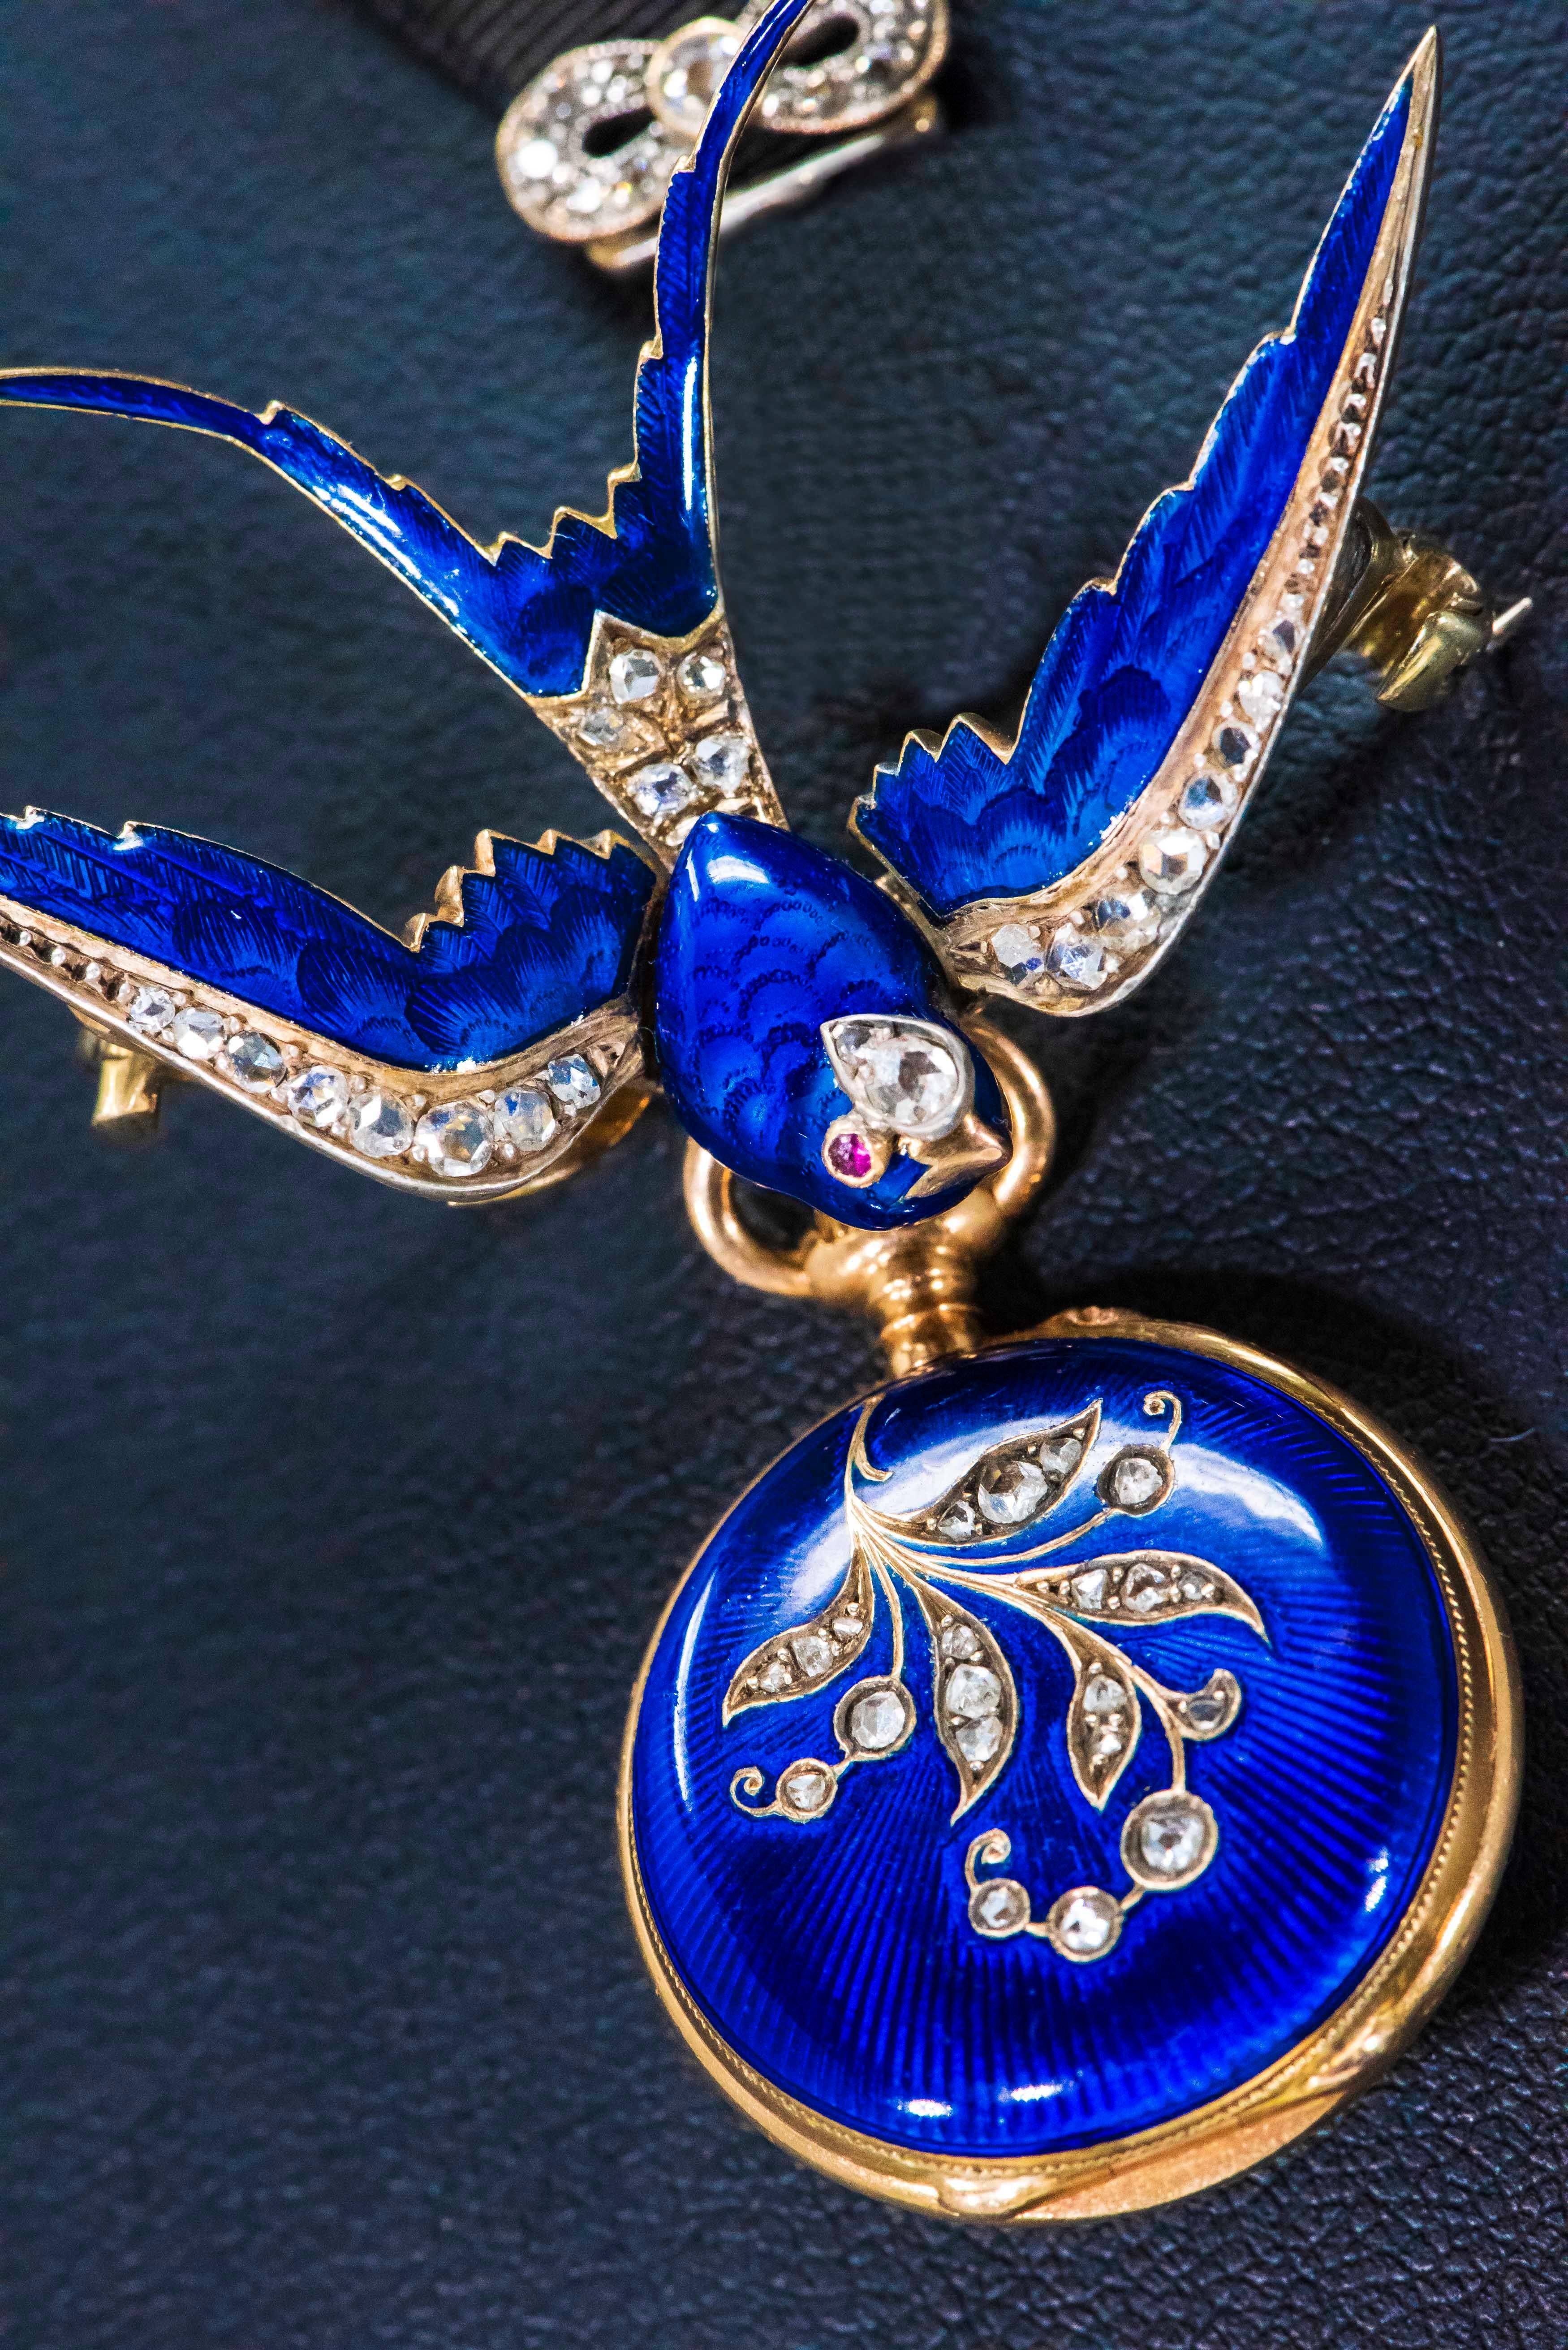 Golay-Leresche et Fils, Genève 
Dimensions
Top of Swallow Tail to bottom of lapel pocket watch pendant : 50mm
Width of Pendant at widest part : 40mm 

The present example is a true work of art and is an extremely rare creation by one of the most